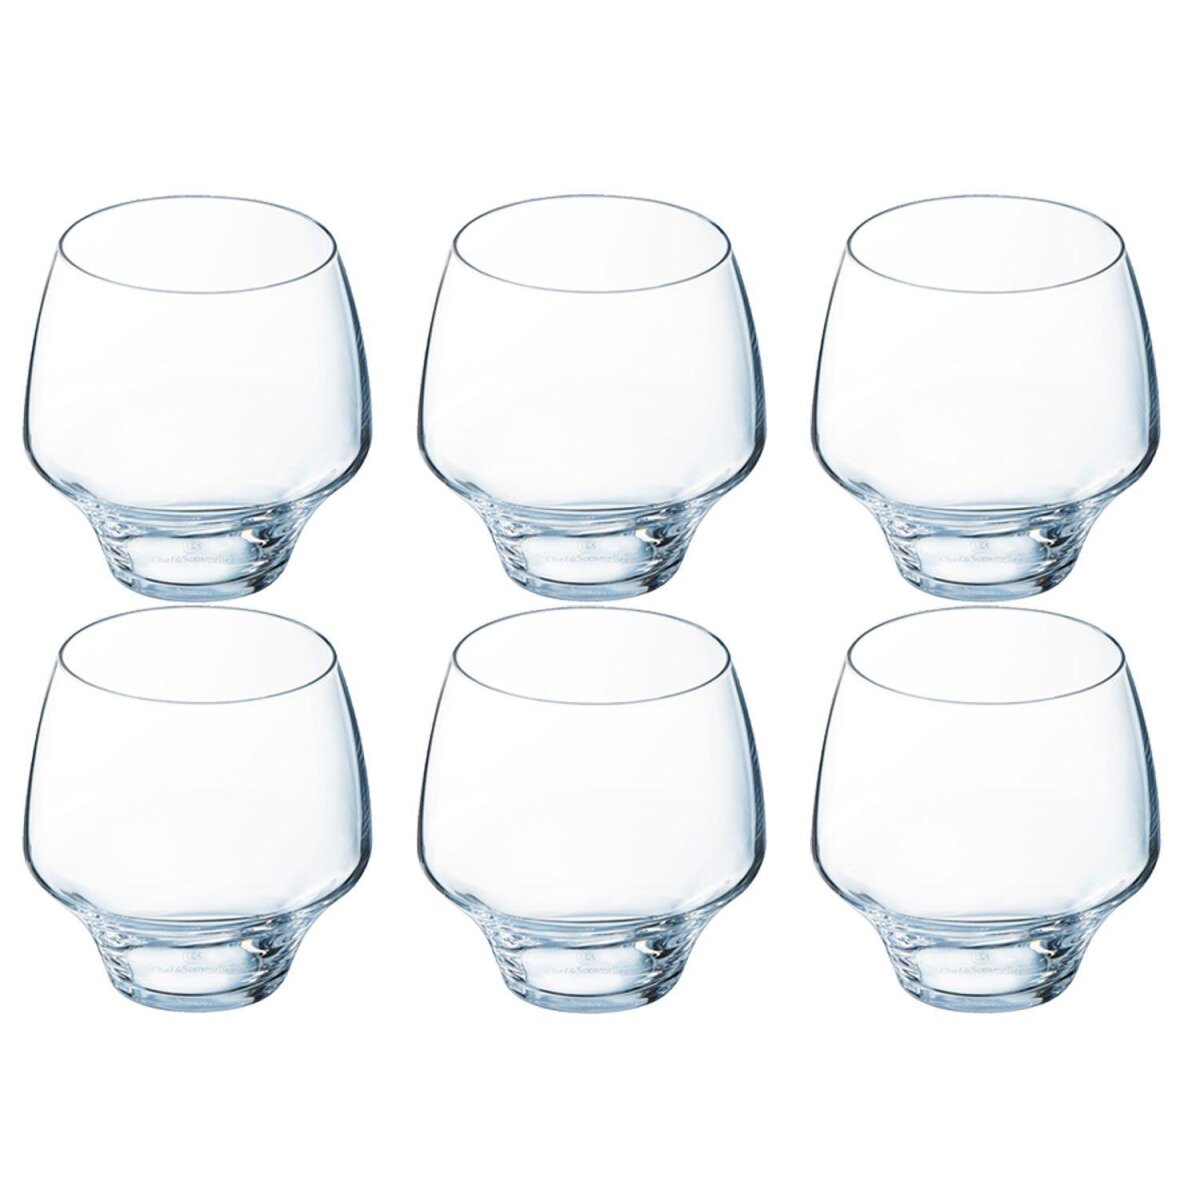 sehr - € Tumbler cl Open B-Ware Up gut, 13,99 Creatable 38